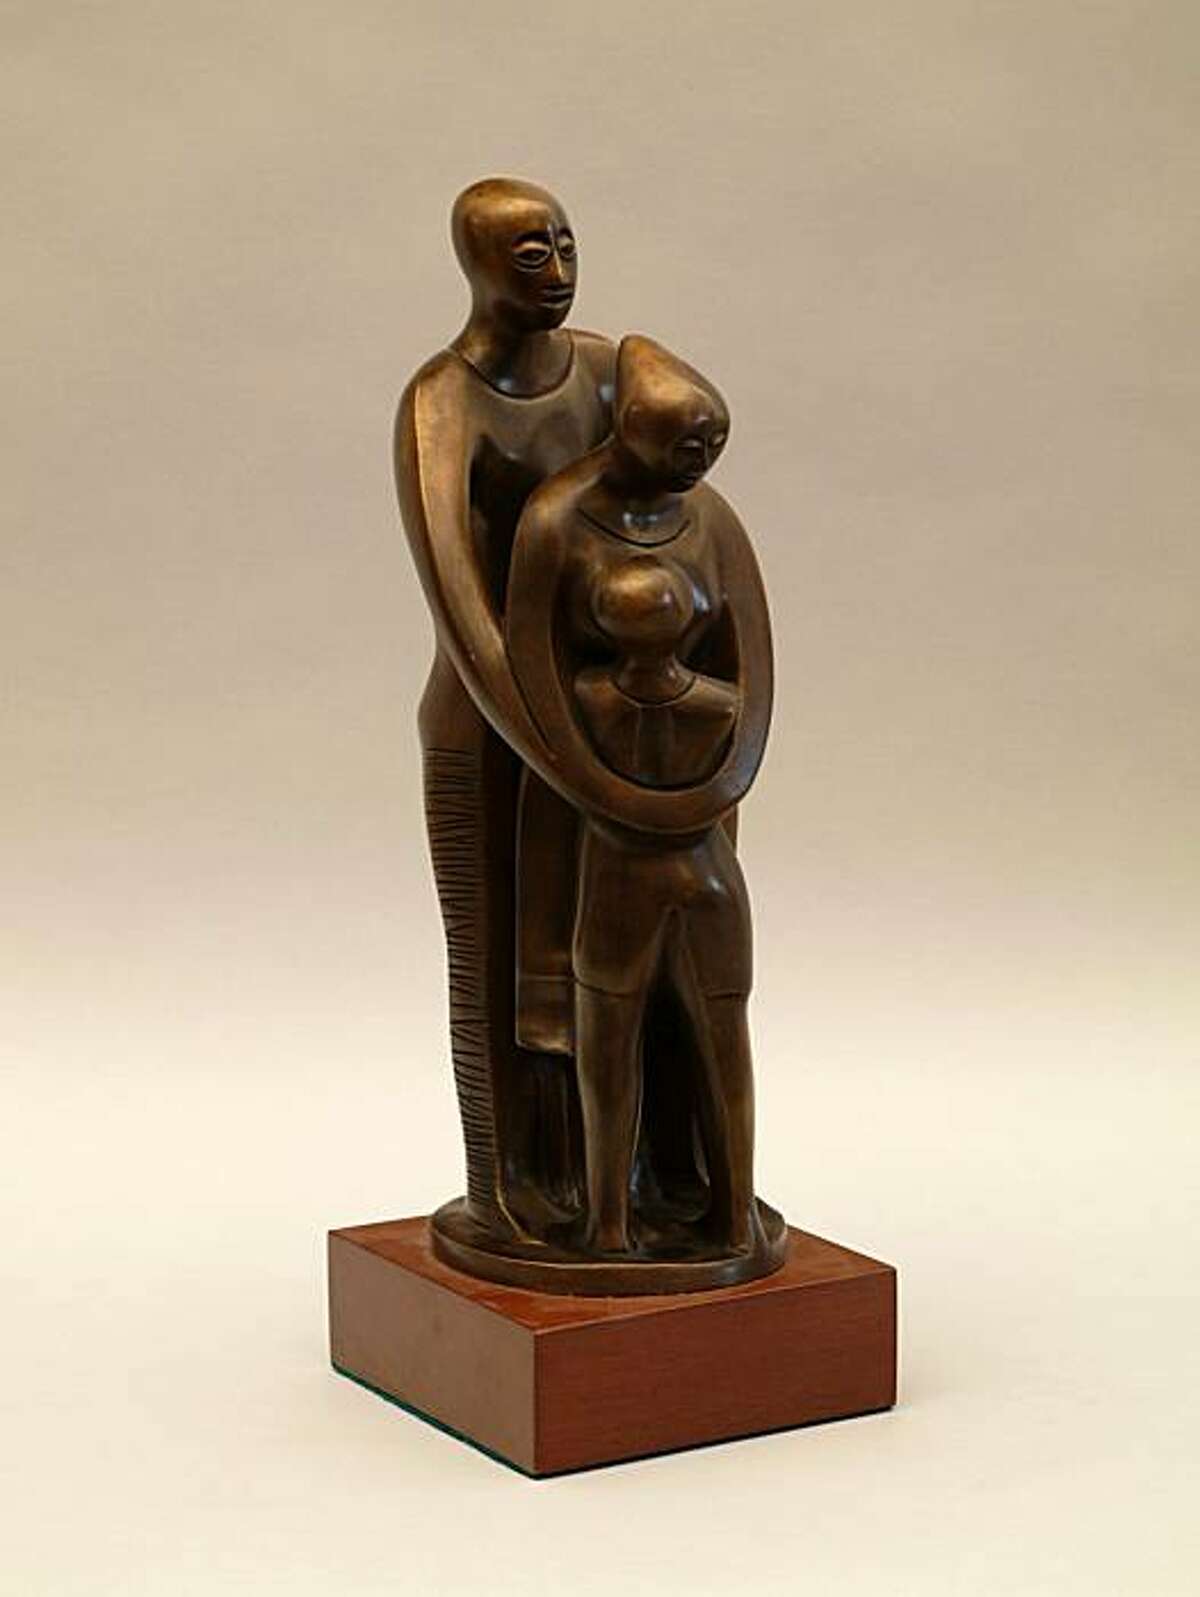 In this image released by Bronx Museum, Elizabeth Catlett's bronze statue "Family" is shown. The piece is part of the exhibition "Stargazers," on display at the Bronx Museum featuring works by Catlett and 21 contemporary artists. The show runs Jan. 27, 2011 through May 29.